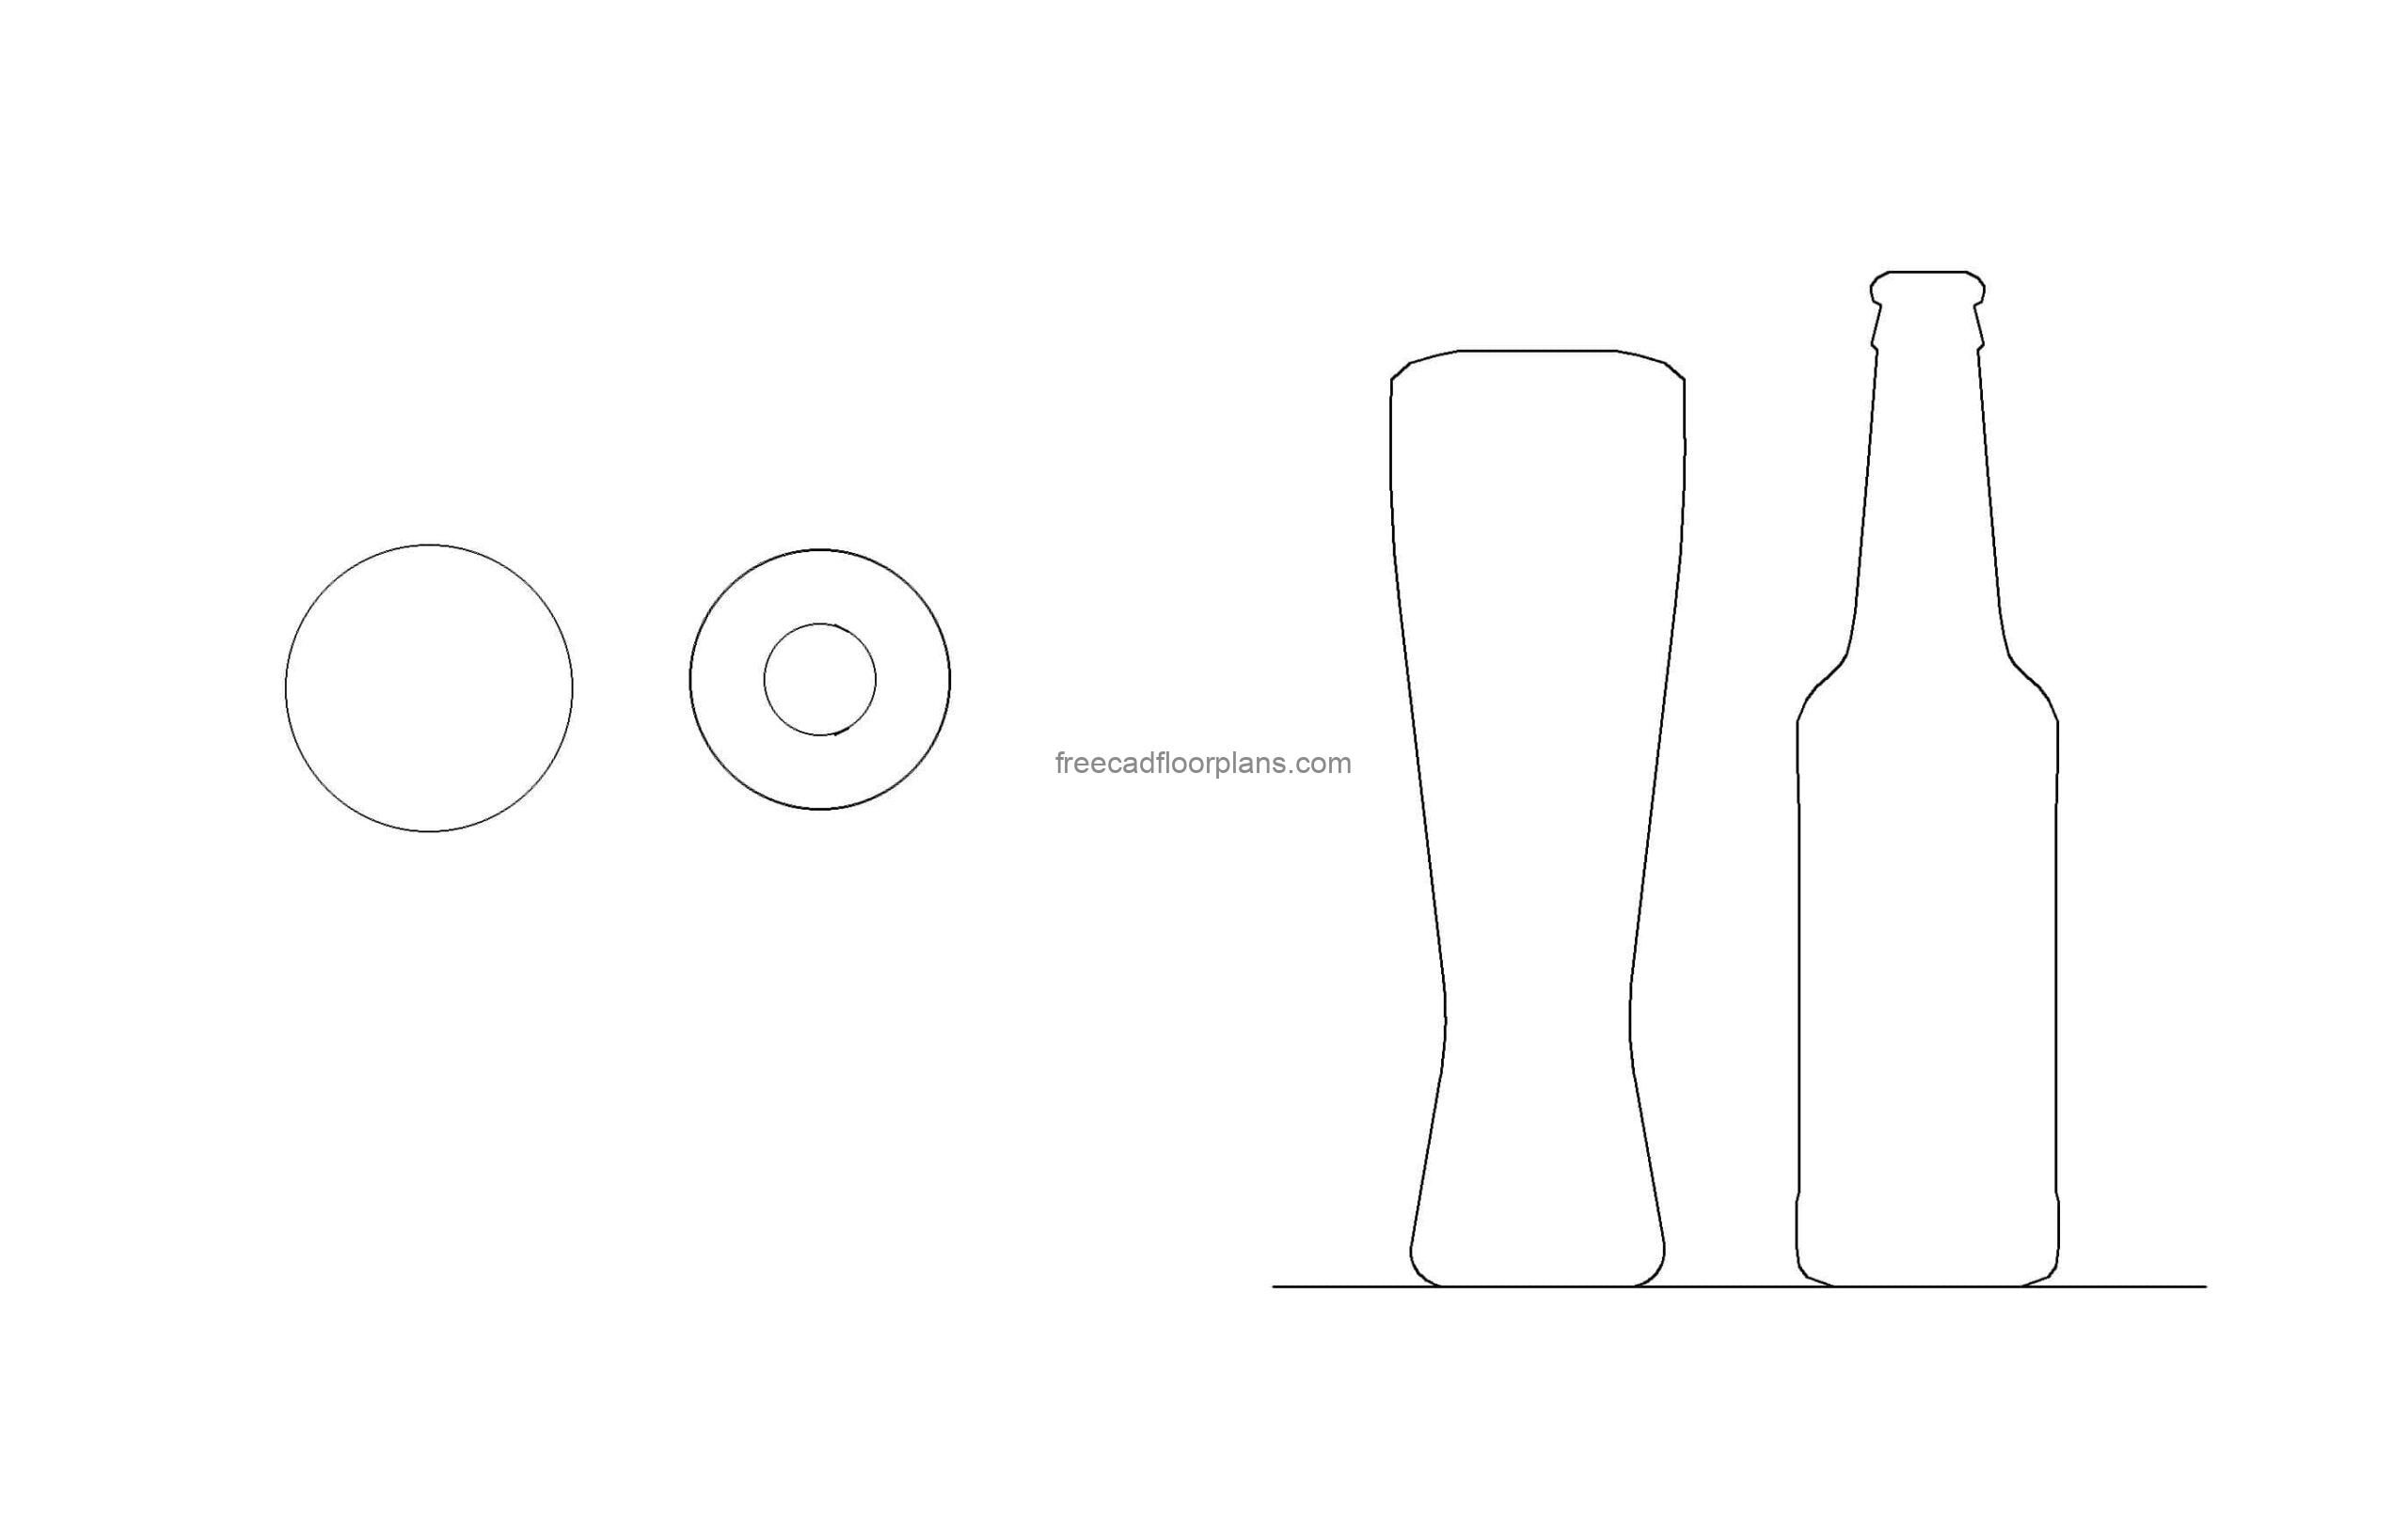 beer bottle autocad block drawing plan and elevation 2d views, dwg file for free download